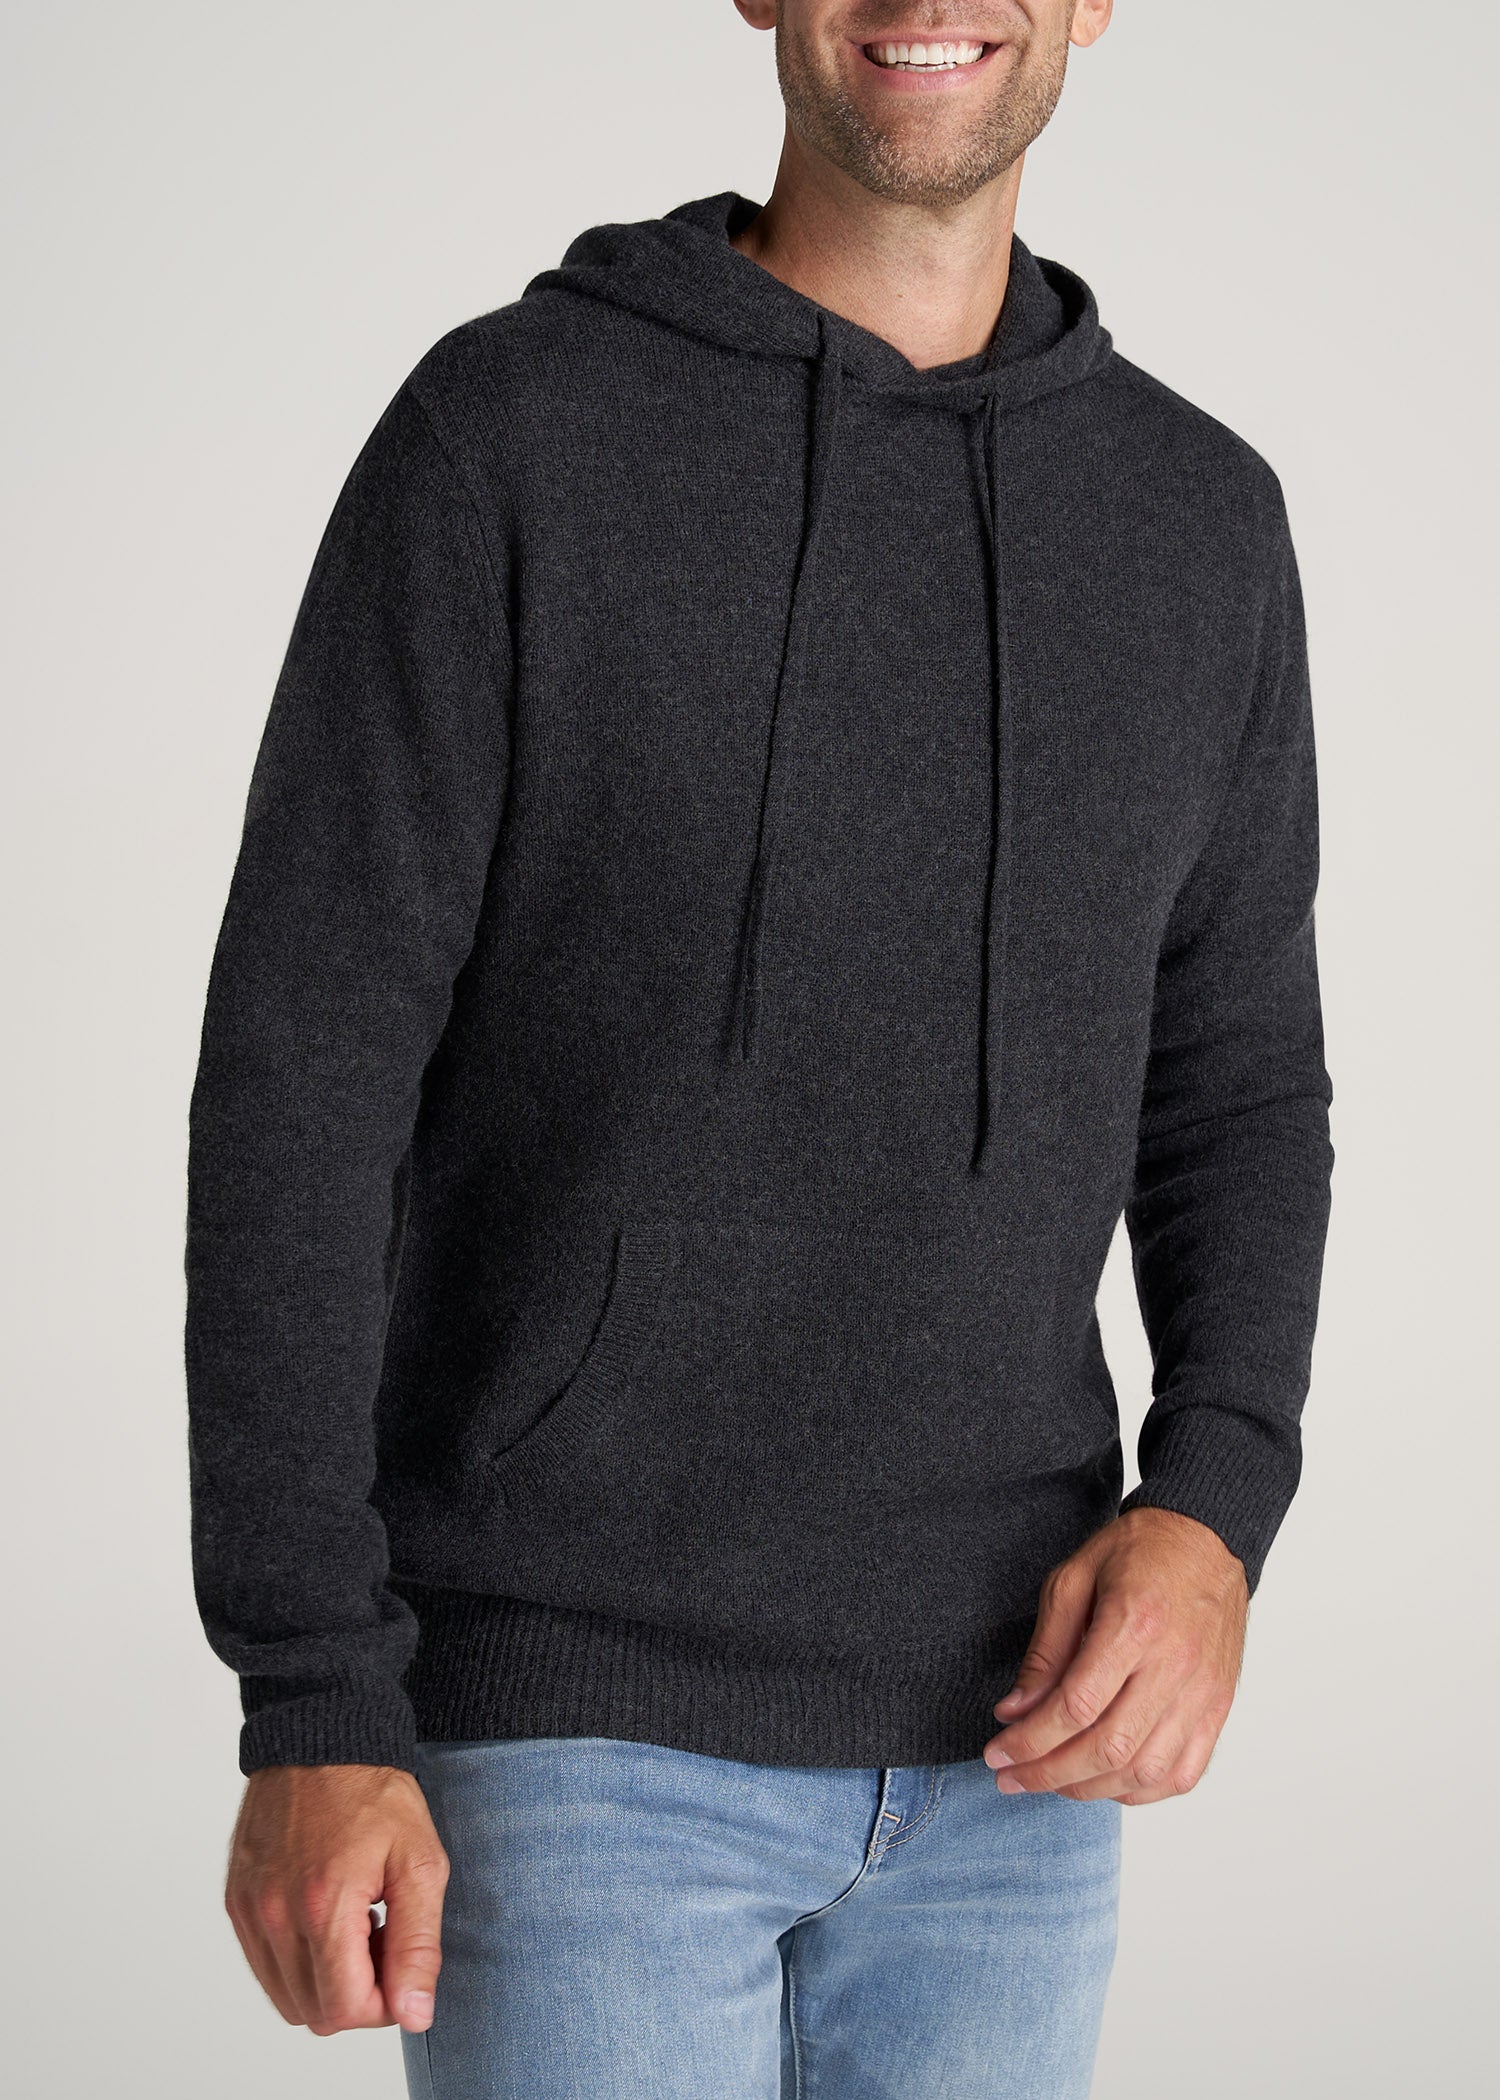 American-Tall-Men-Hooded-Sweater-Merino-CharcoalMix-front